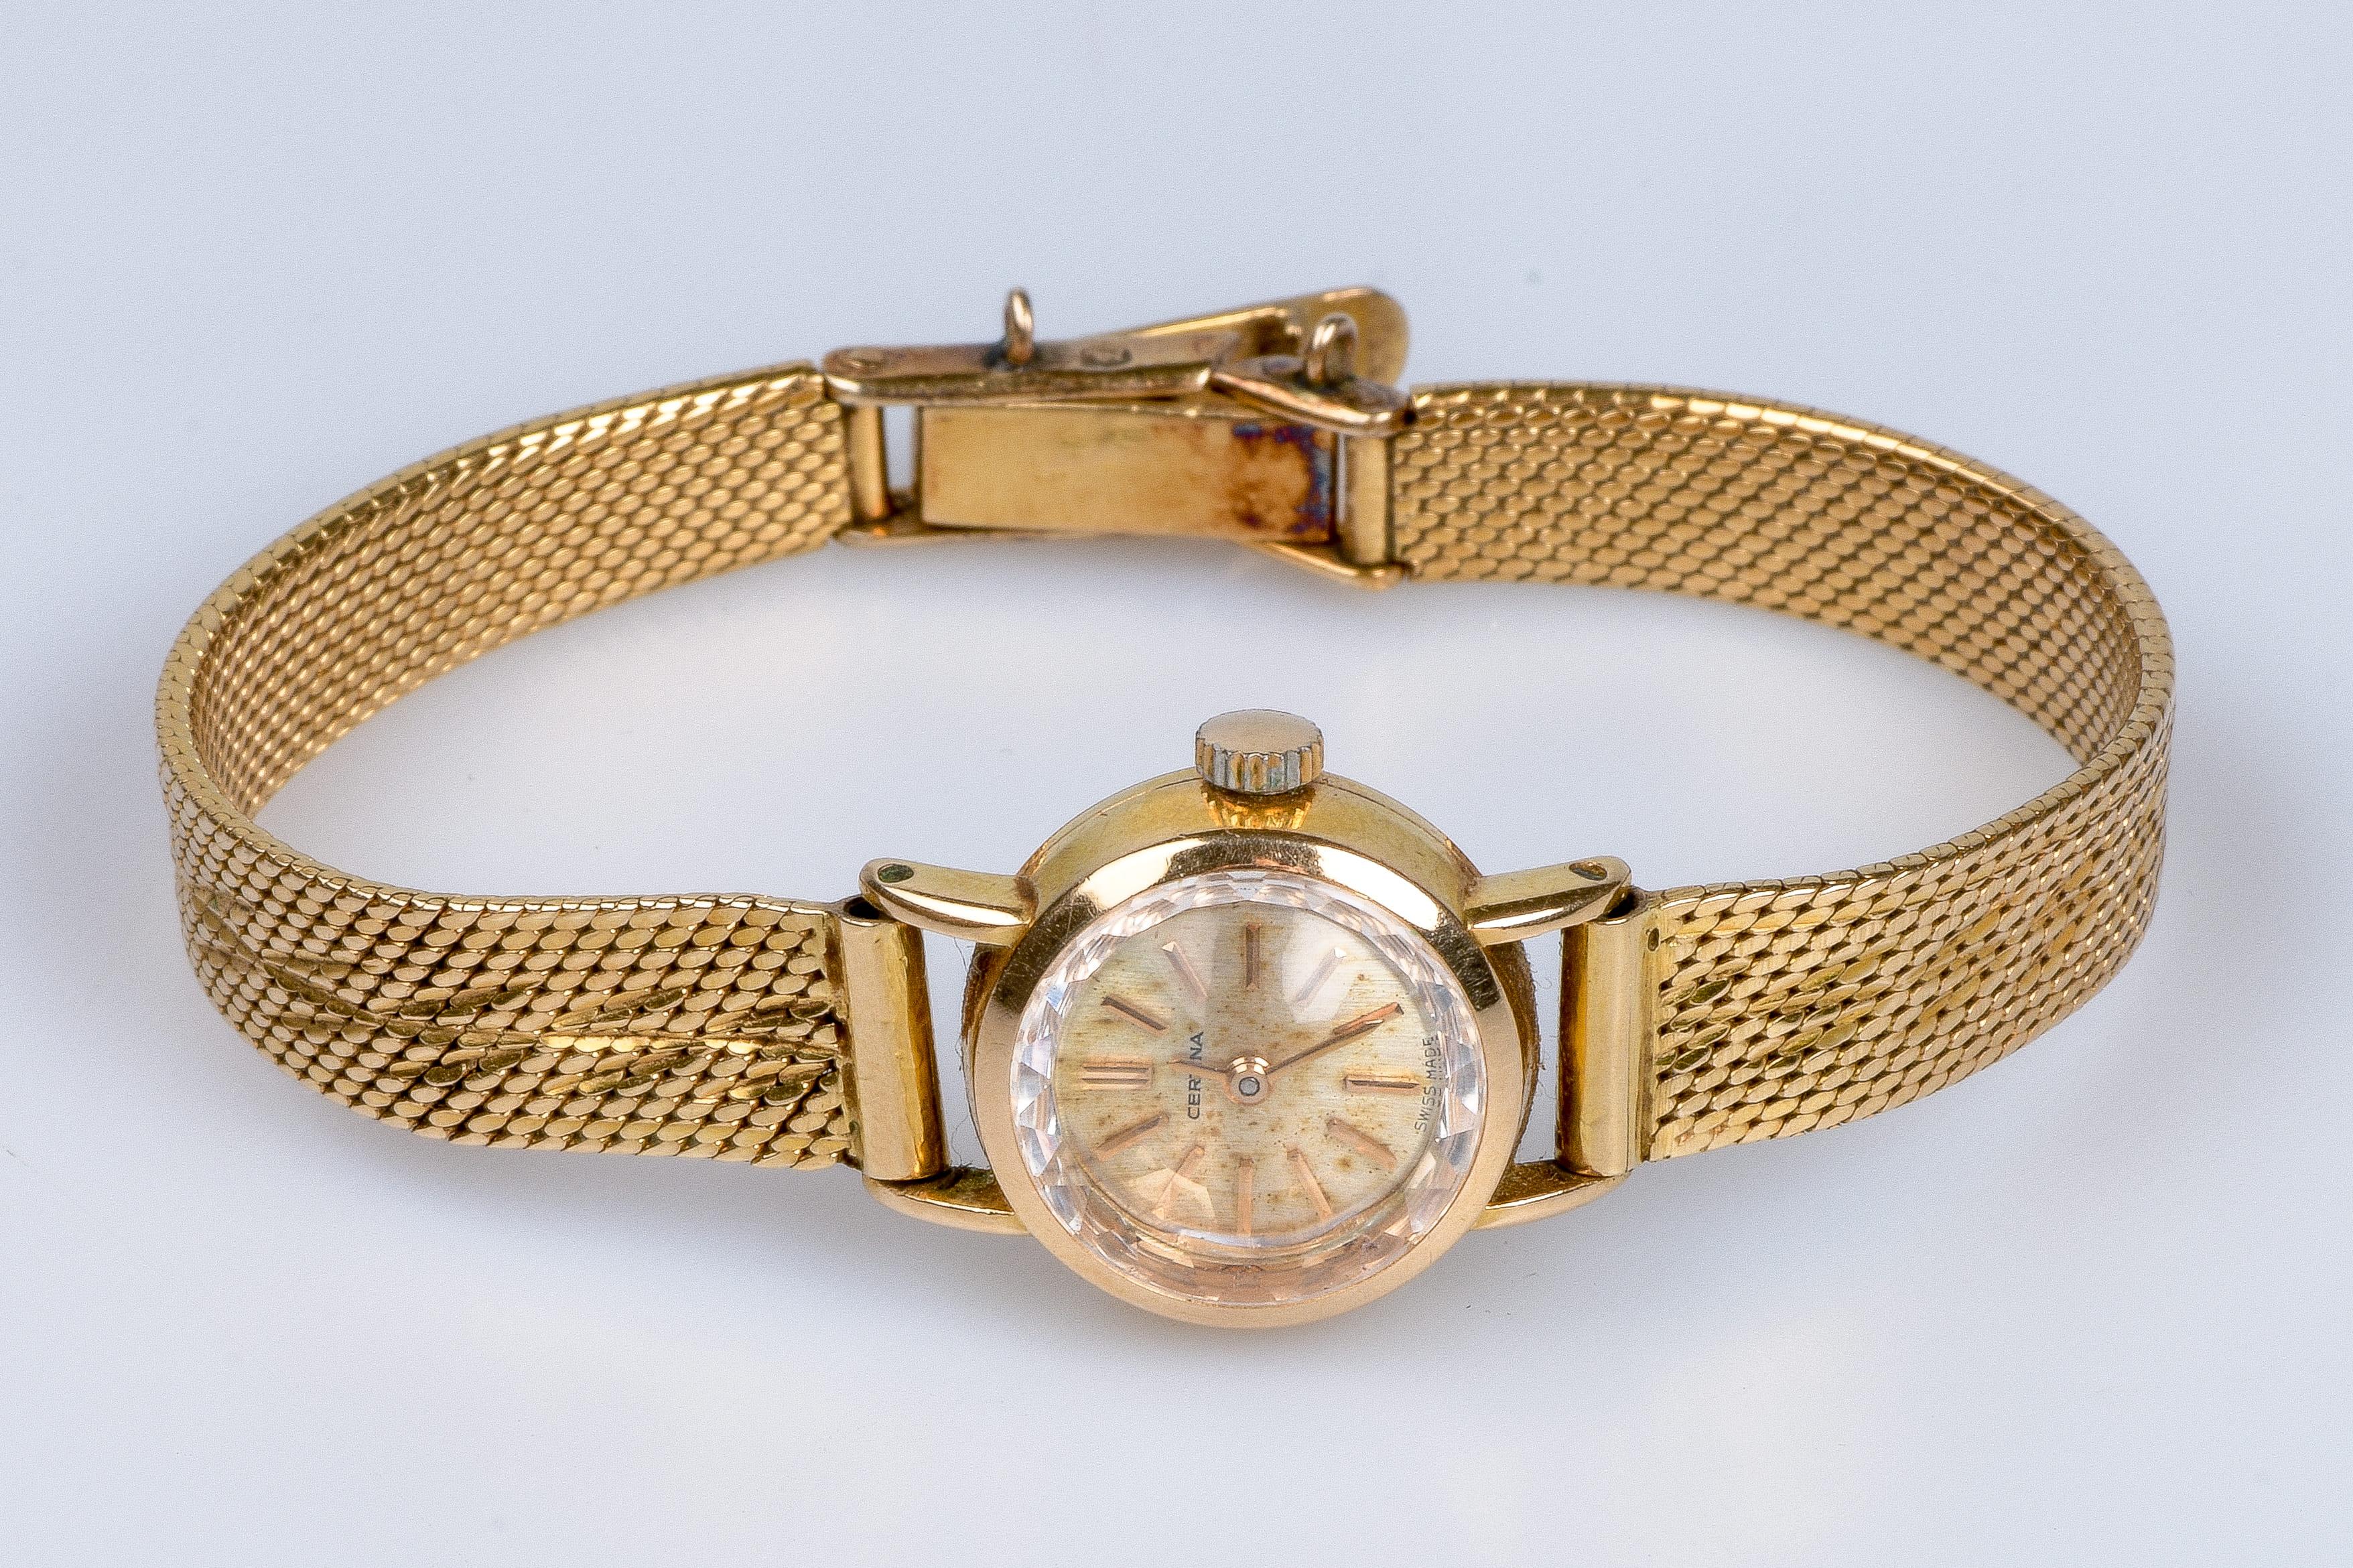 Women's CERTINA's watch in 18carats yellow gold with a soft decorated fine mesh bracelet